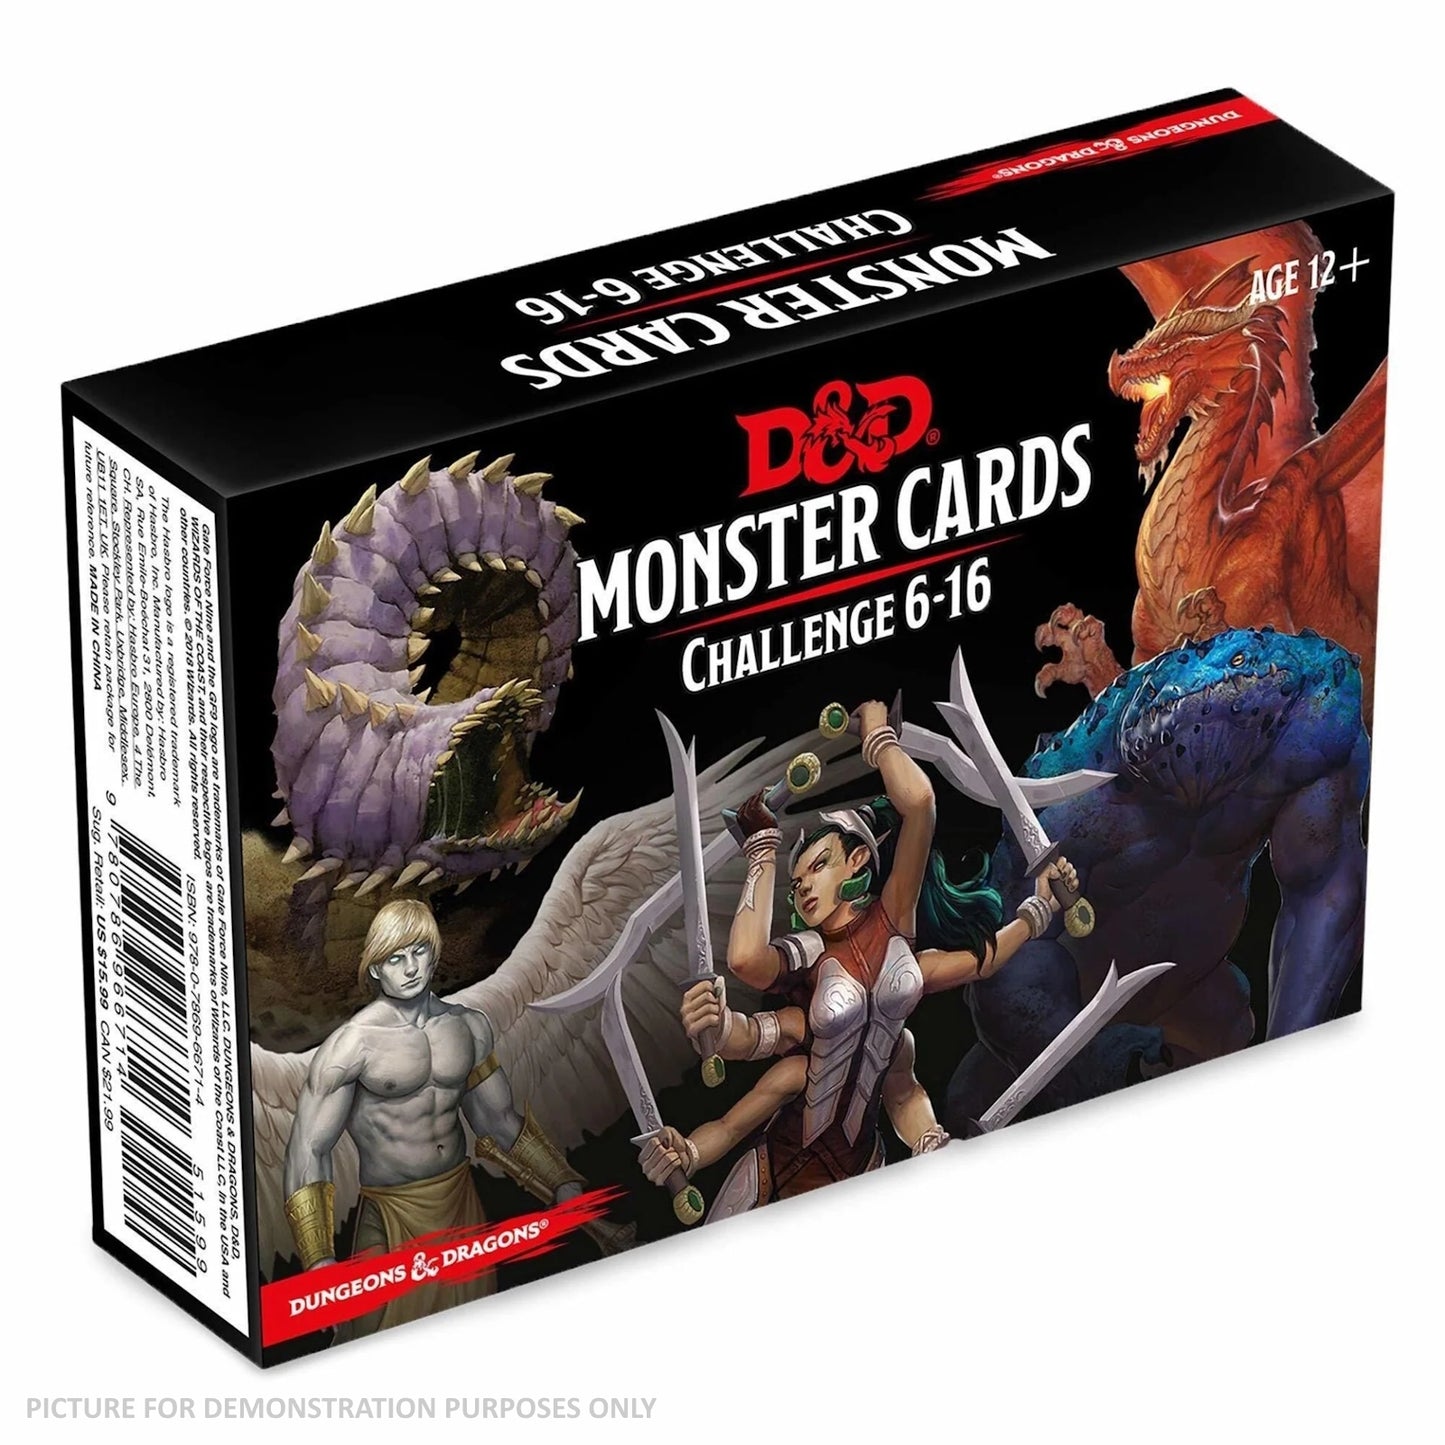 Dungeons & Dragons Monster Cards Challenge Deck 6-16